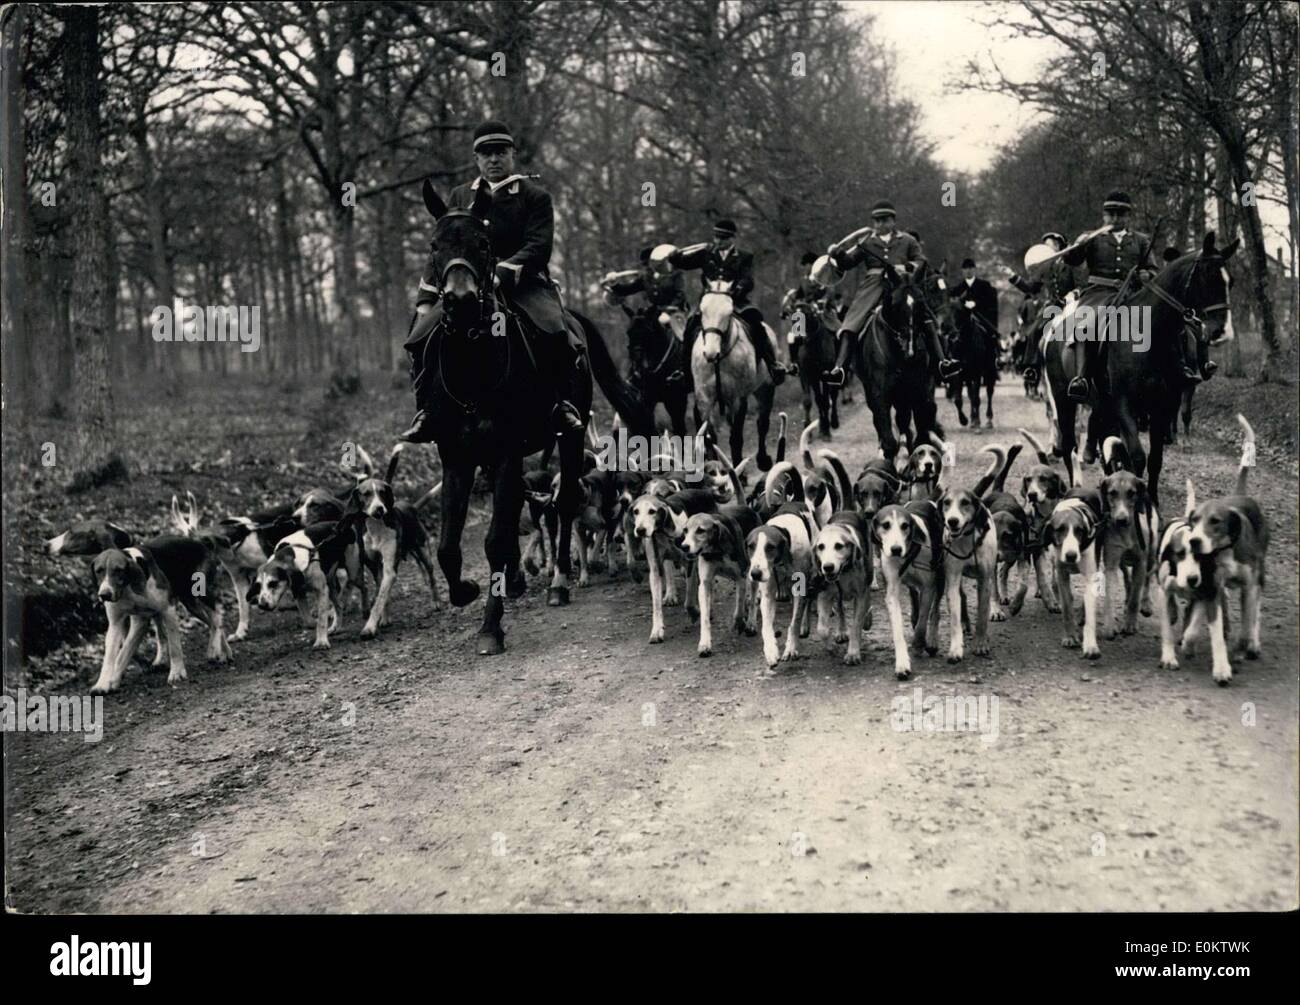 Mar. 27, 1951 - Hunting Party in Rambouillet Stock Photo